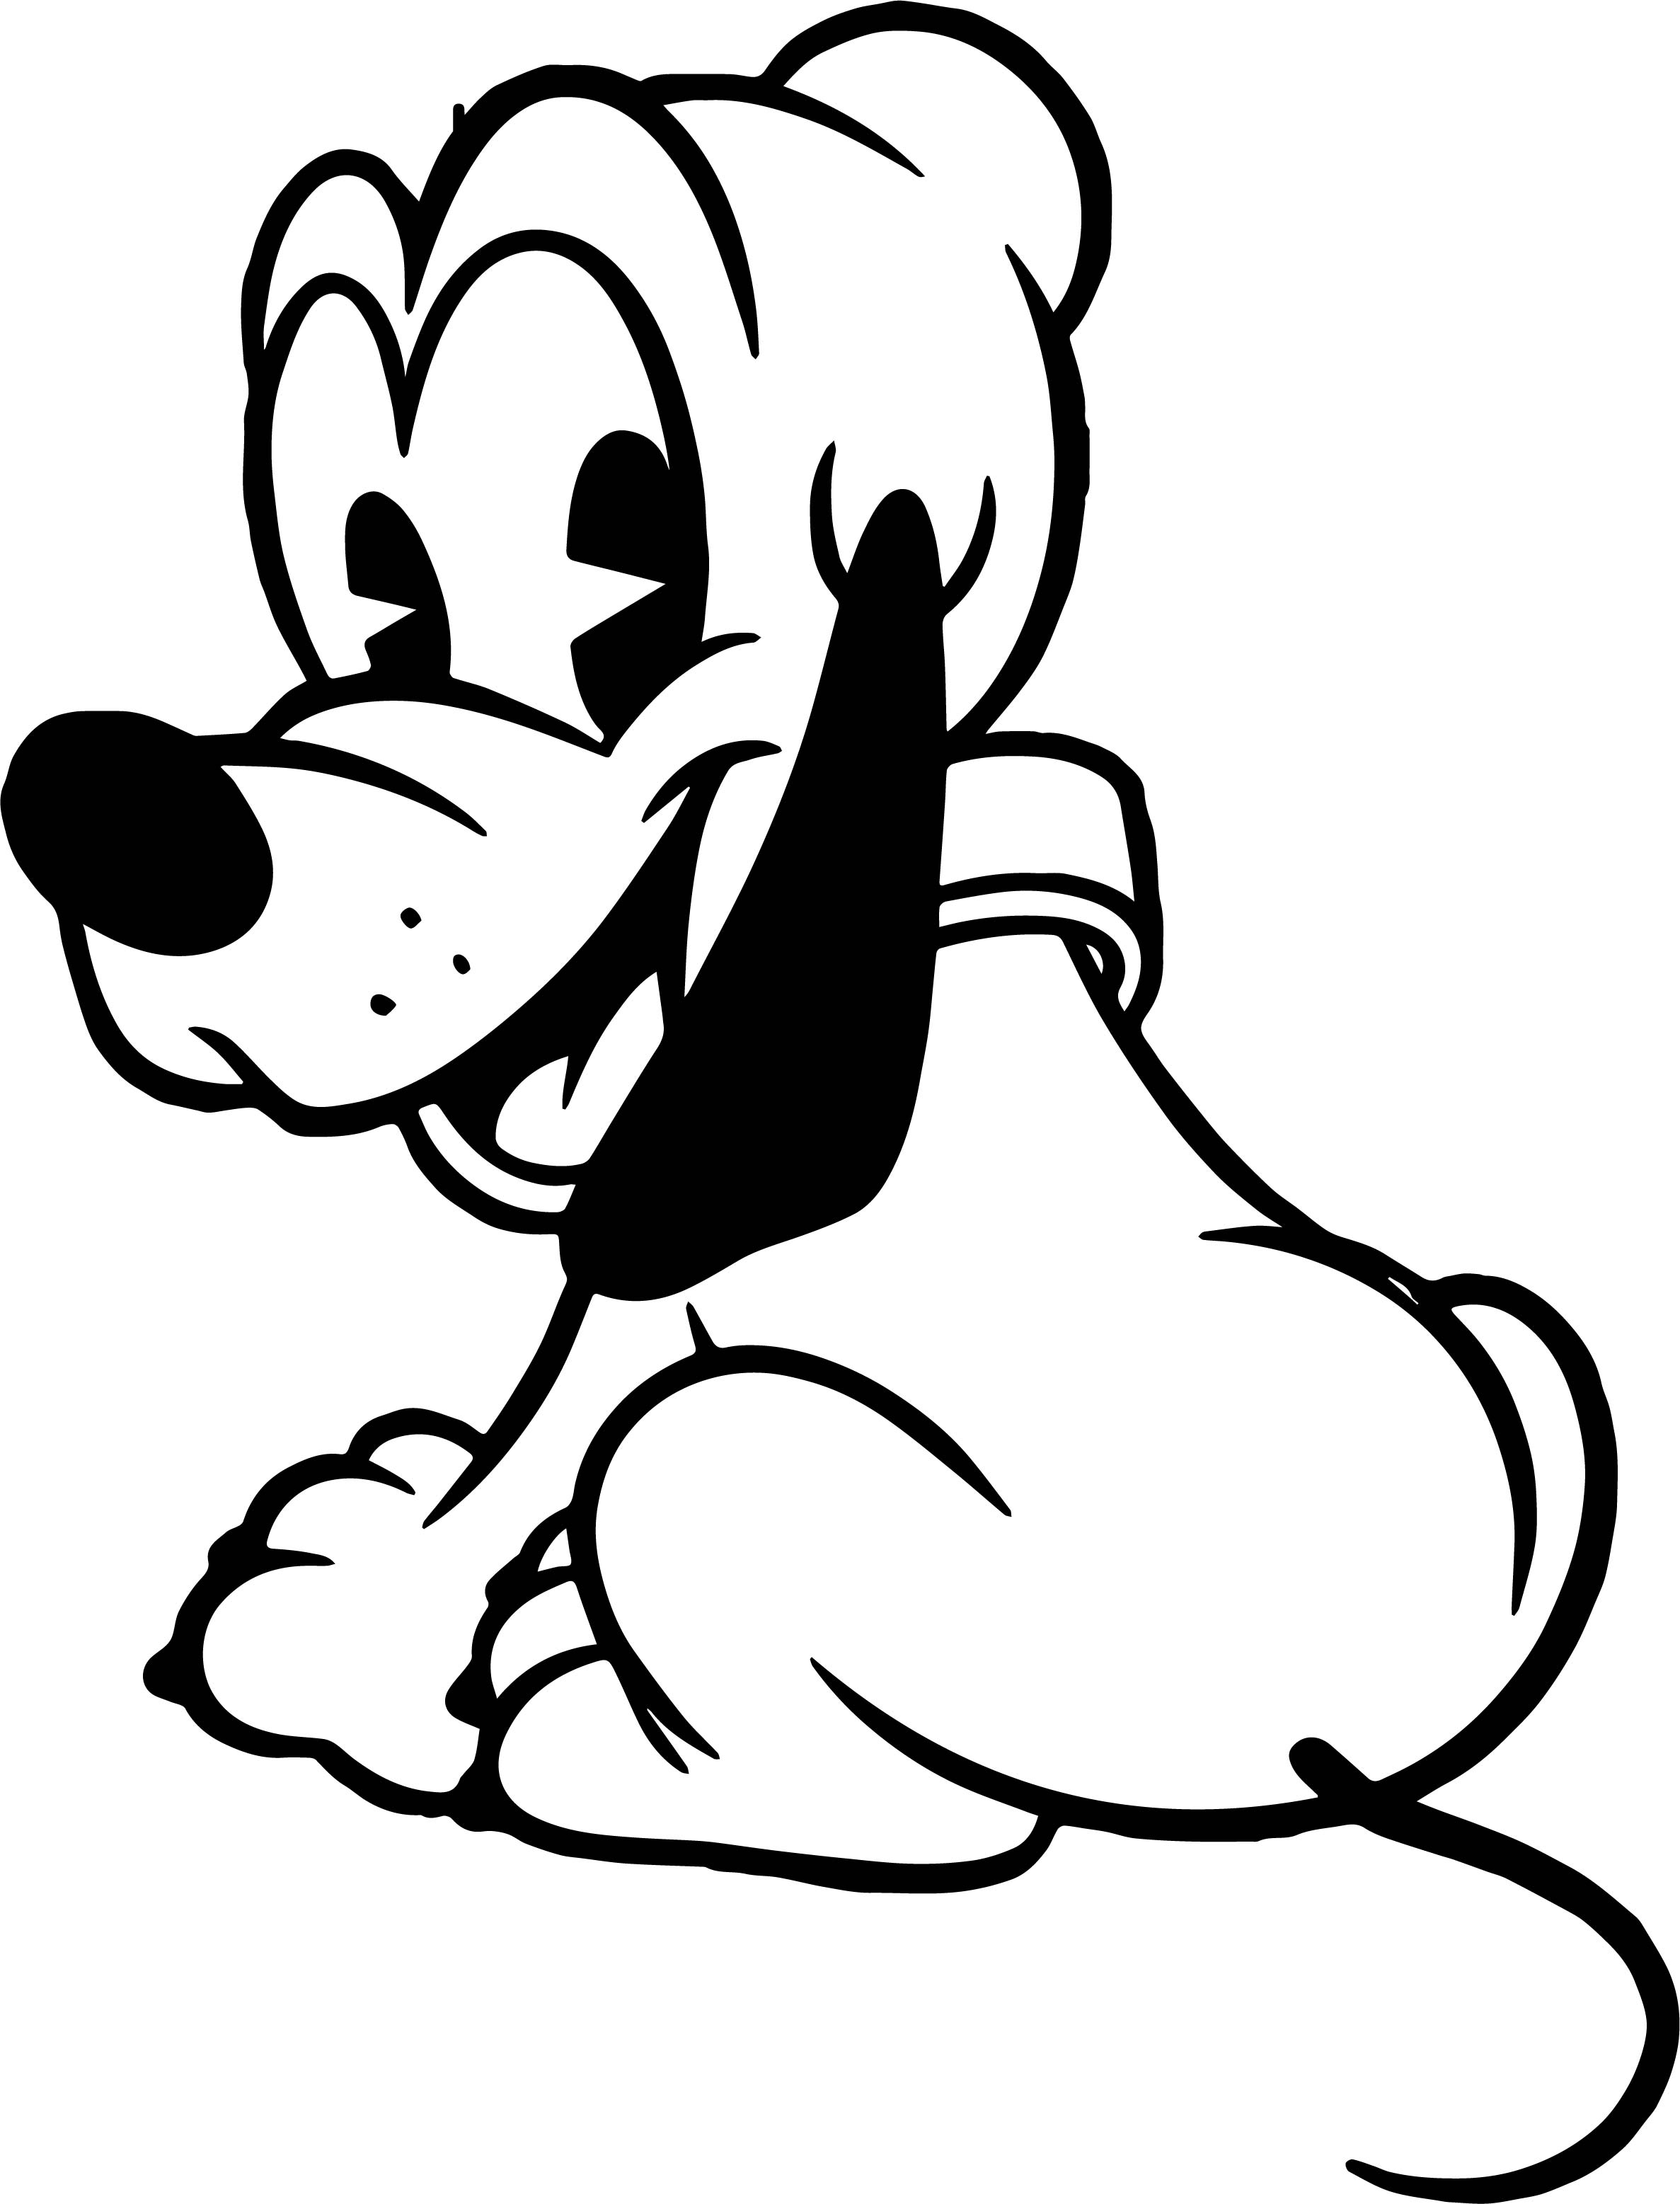 Pluto Coloring Pages Pluto Cartoon Drawing Free Download Best Pluto Cartoon Drawing On